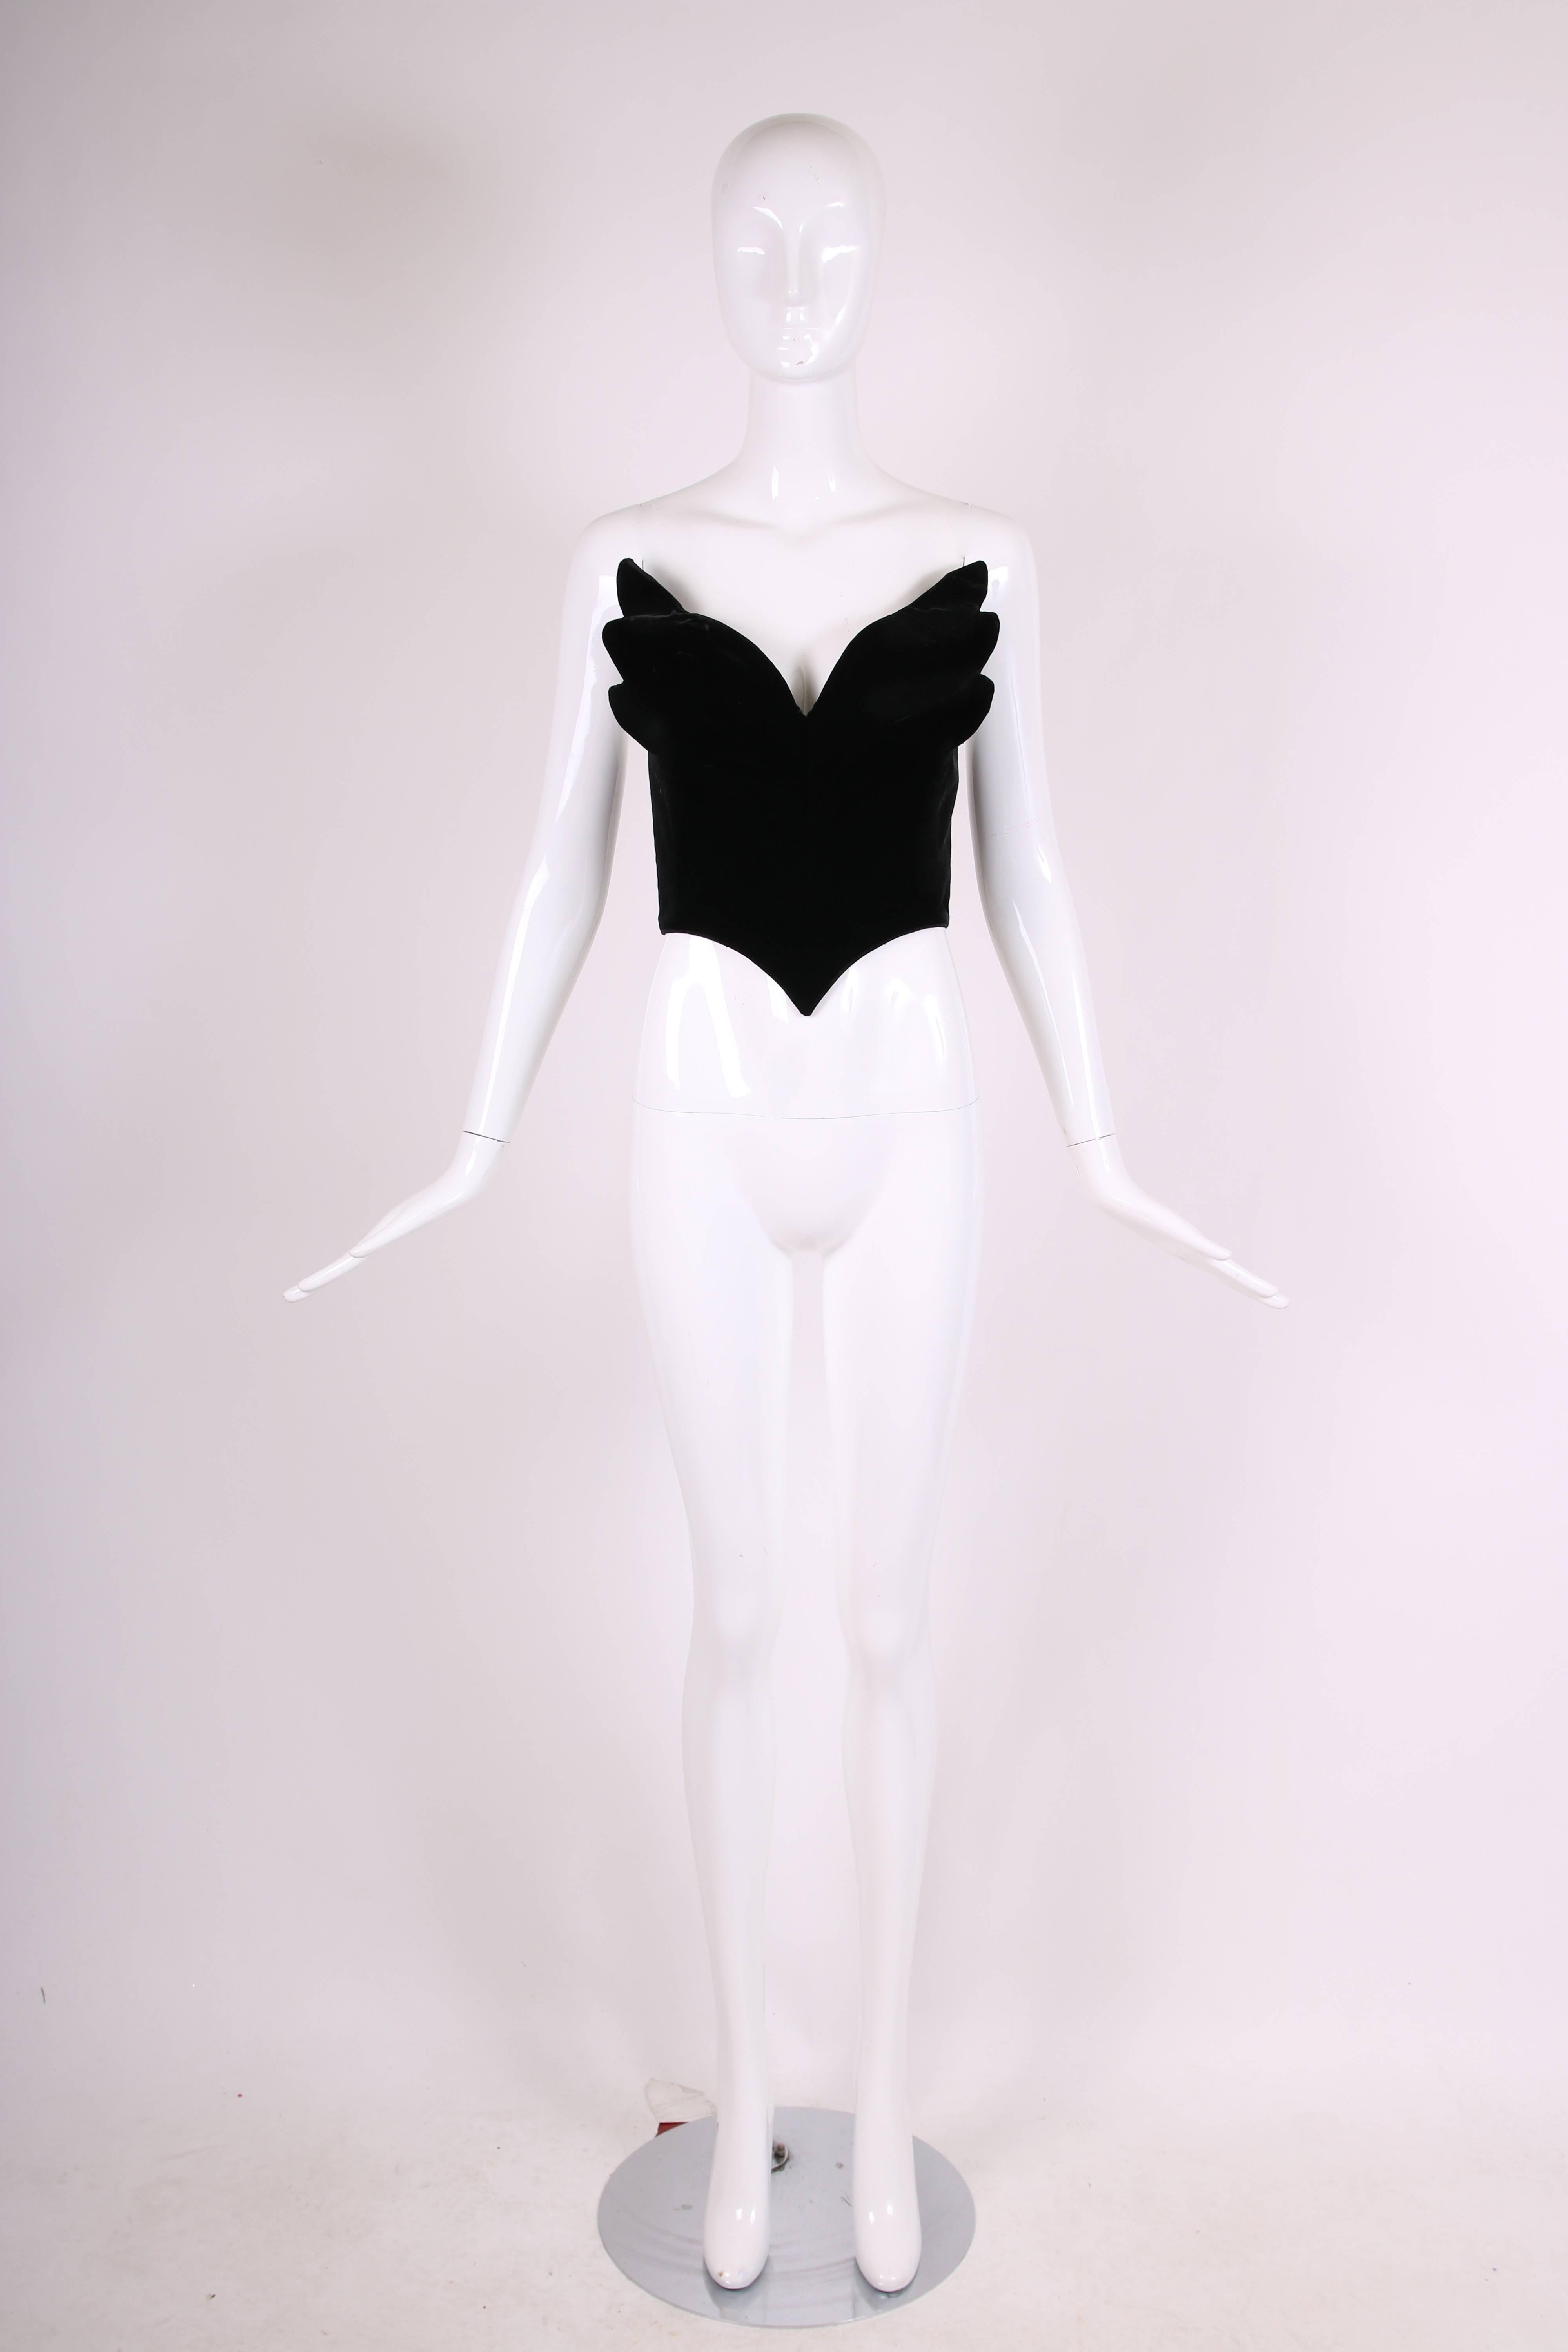 A ca. 1992 Thierry Mugler black velvet concept bustier in the shape of angel wings. Constructed from bendable wire sewn into the fabric interior, the angel wings give the impression of flying off the sides of the bustier. The corset itself is lined